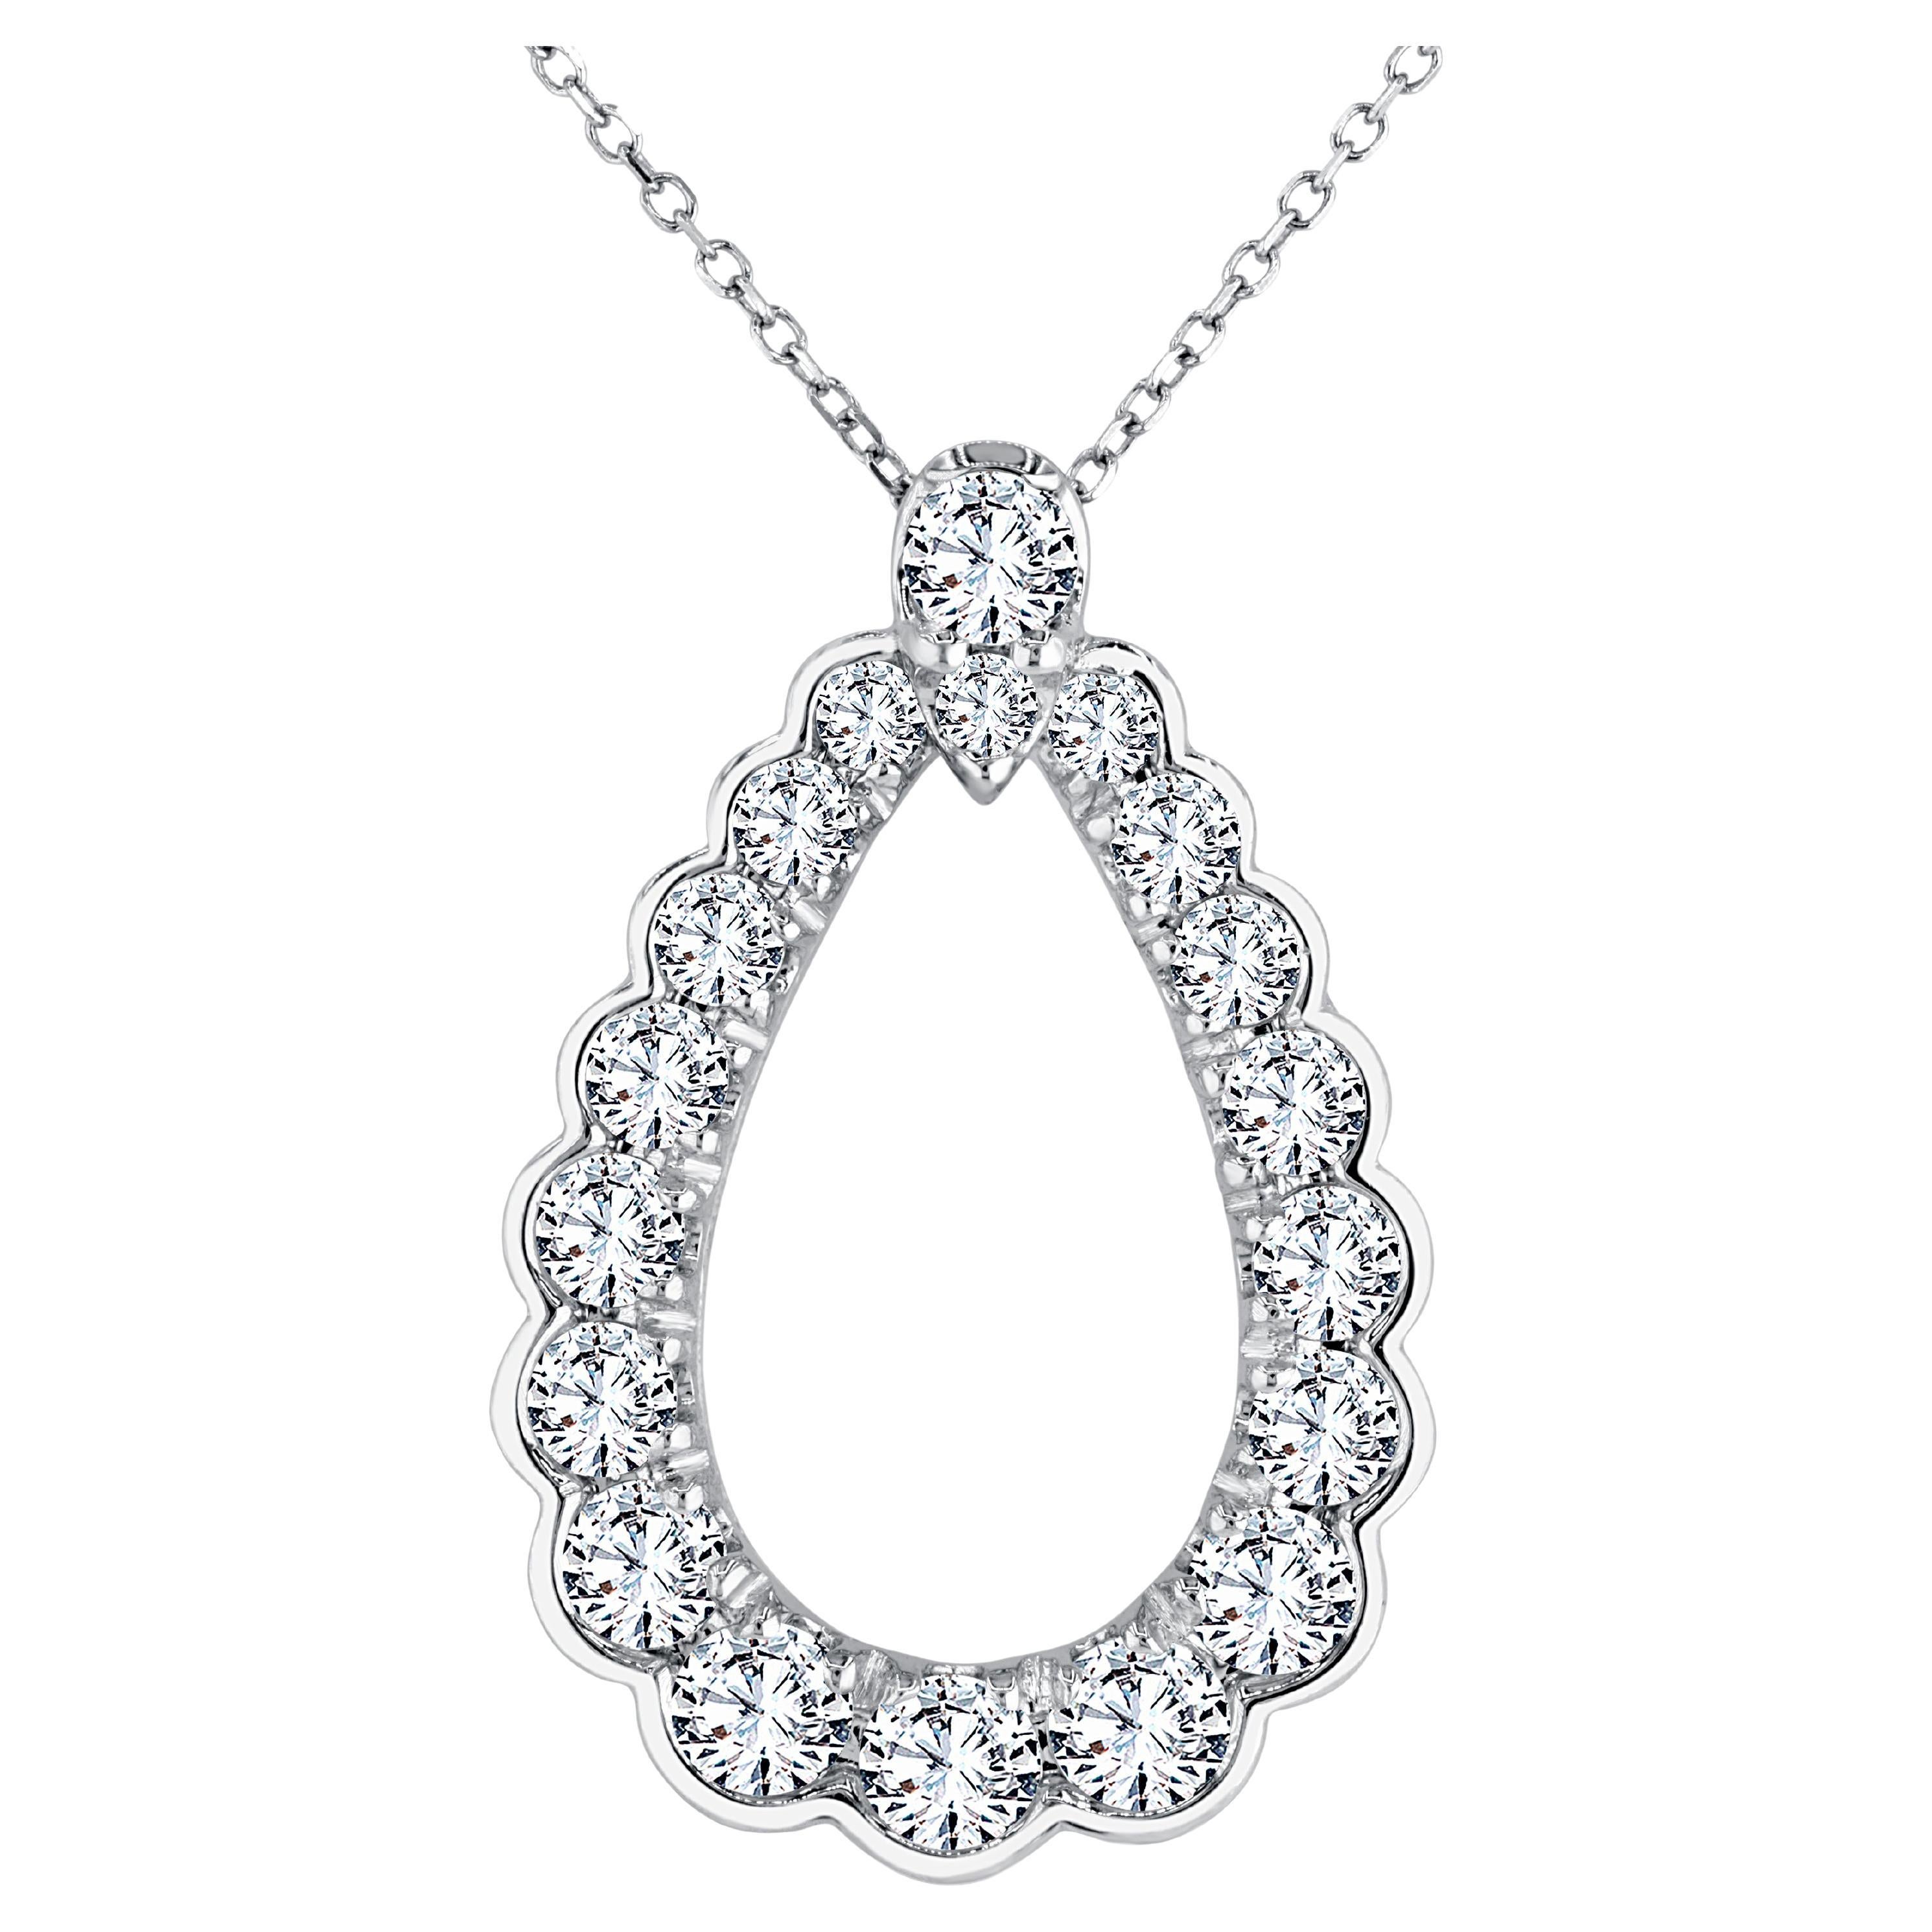 1.52 Carat Pear Form Graduated Natural Diamond Pendant in 14k White Gold ref2166 For Sale